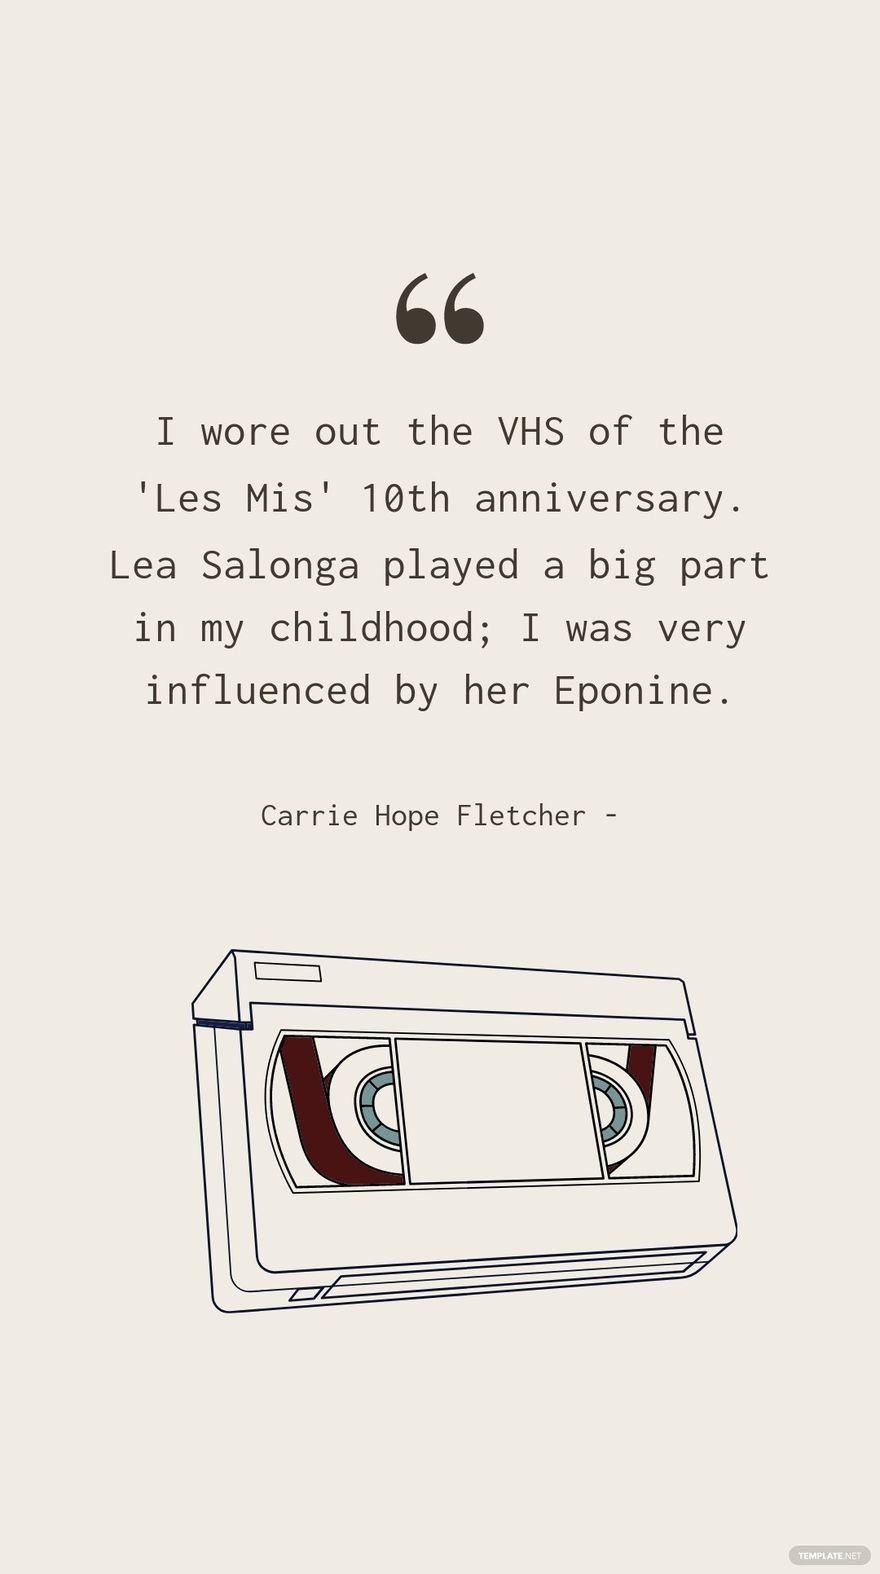 Free Carrie Hope Fletcher - I wore out the VHS of the 'Les Mis' 10th anniversary. Lea Salonga played a big part in my childhood; I was very influenced by her Eponine.